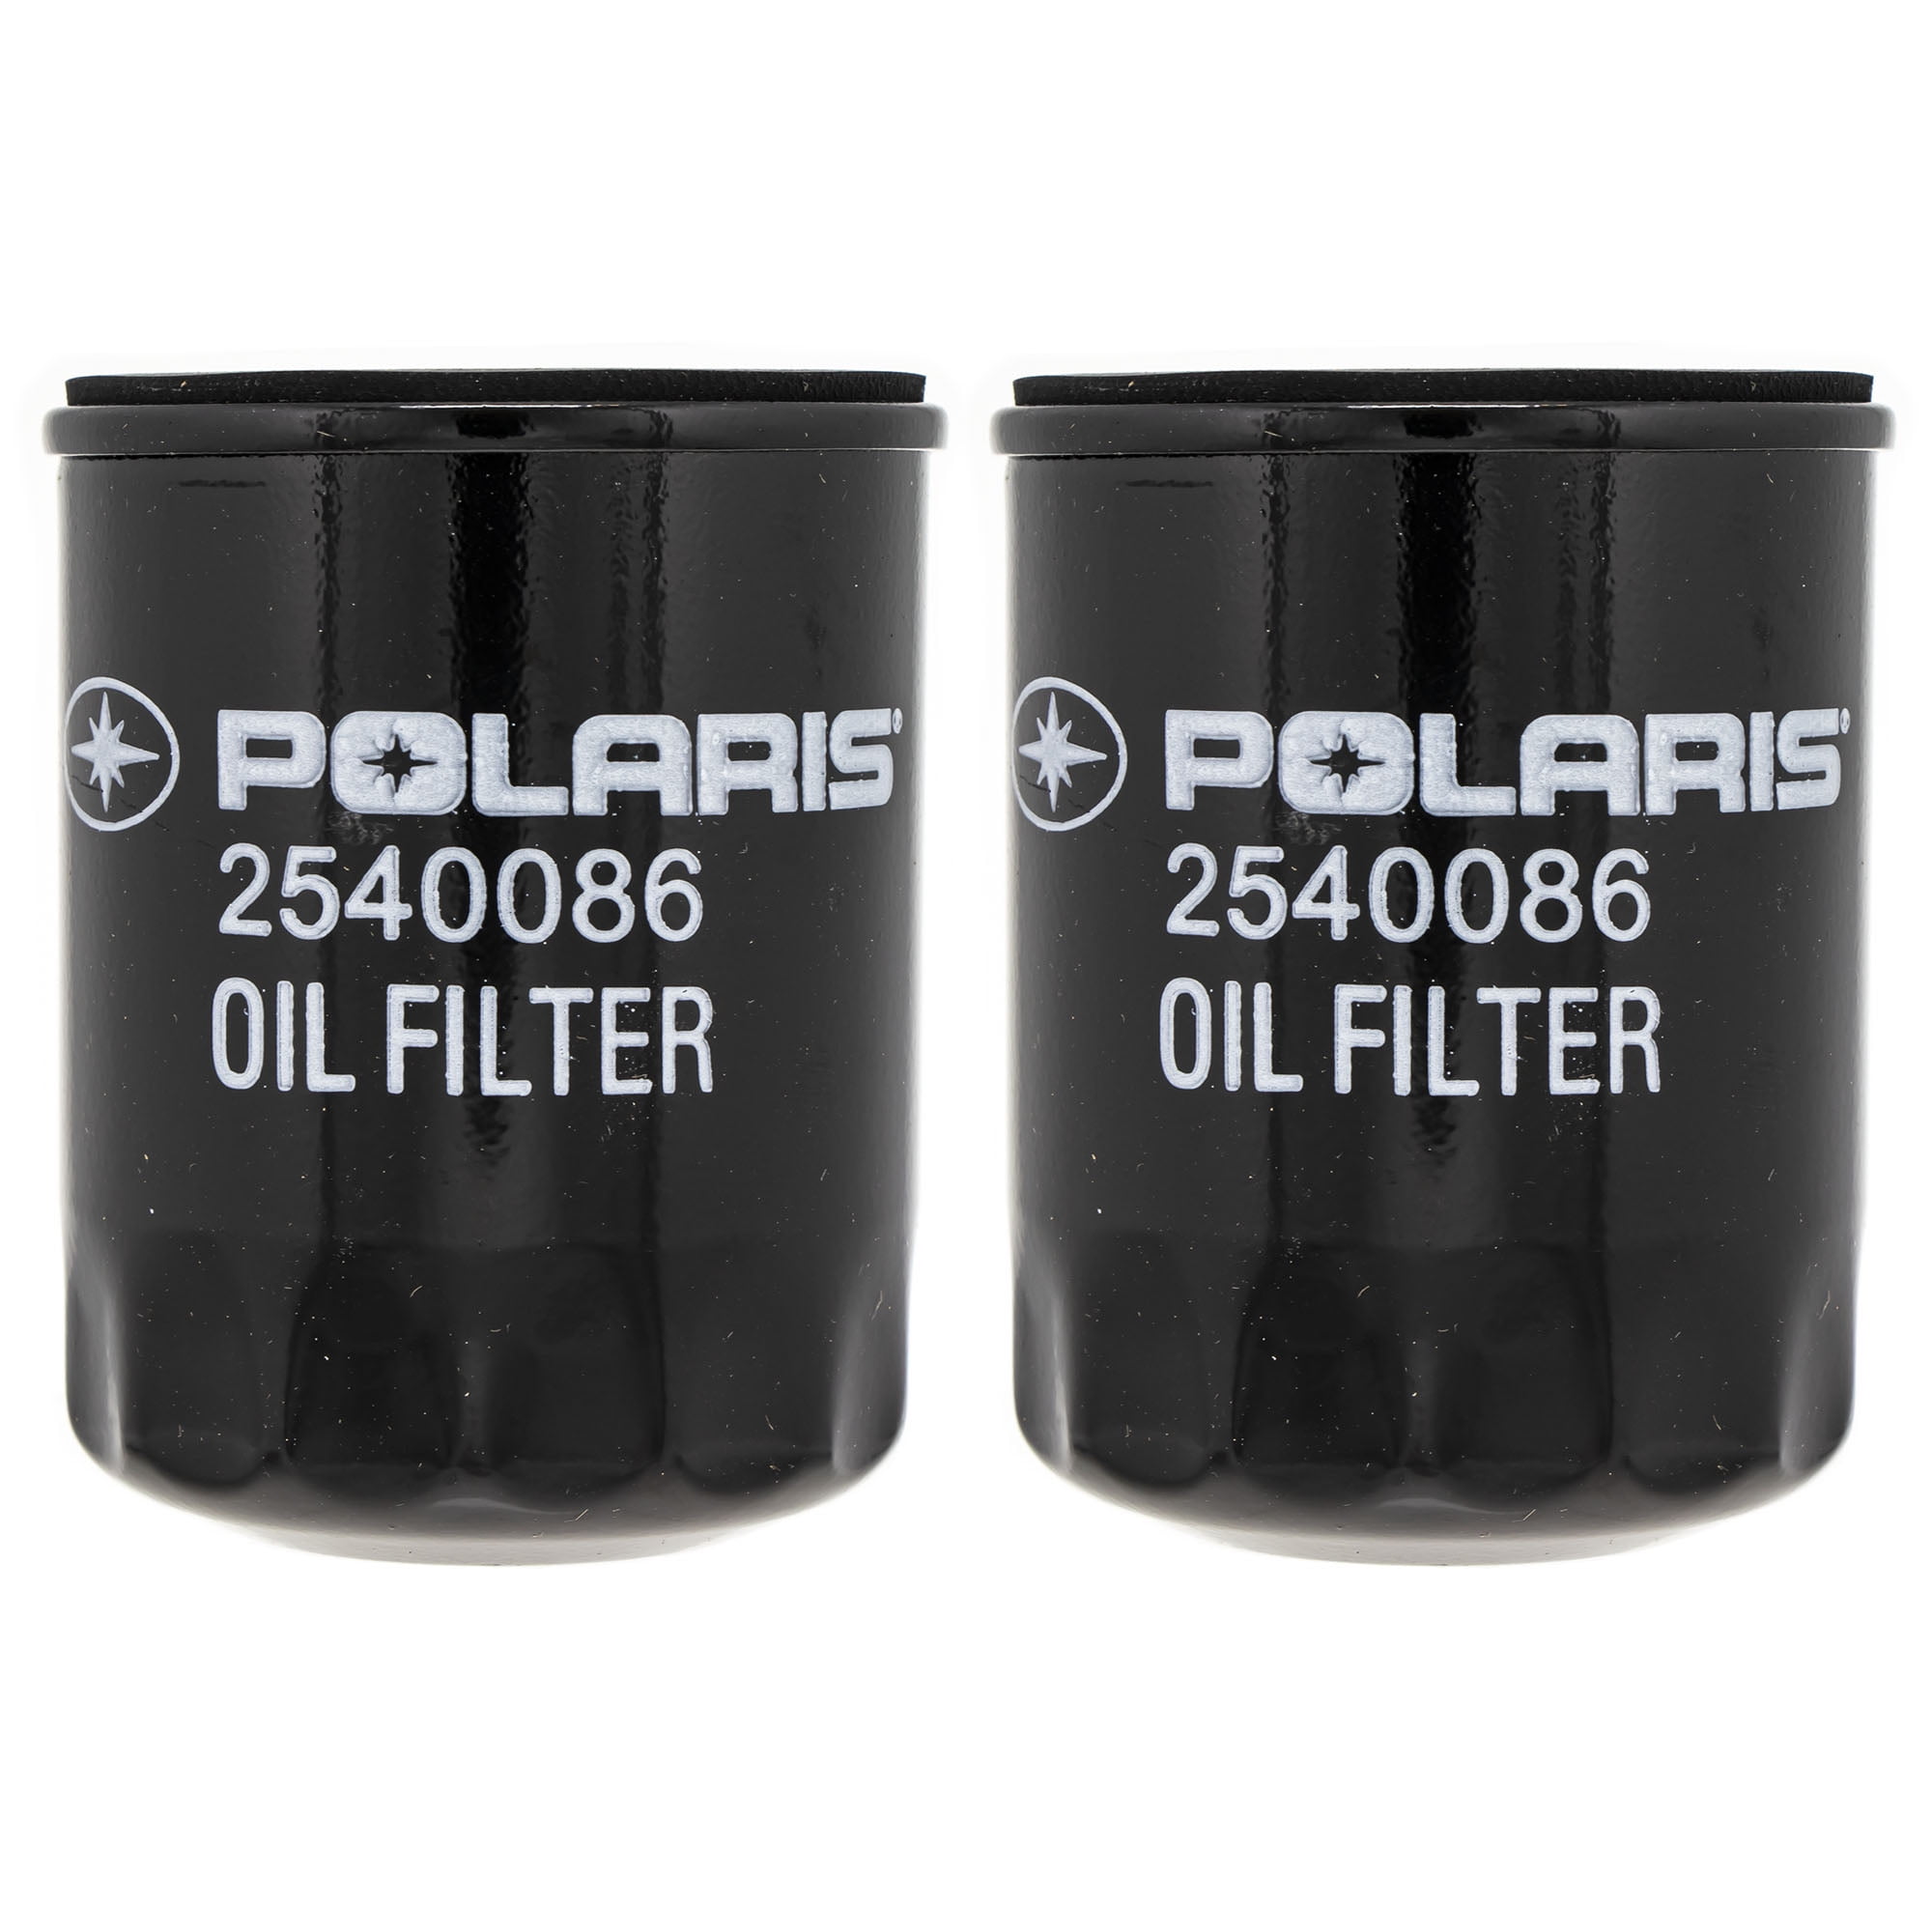 Physeed 2 Packs 2540086 Oil Filter Replacement for HF198 Polaris Sportsman 600 700 800 1000 XP EPS Twin LE X2 EFI General ACE RZR Ranger 700 800 900 500 570 1000 Crew 2540122 